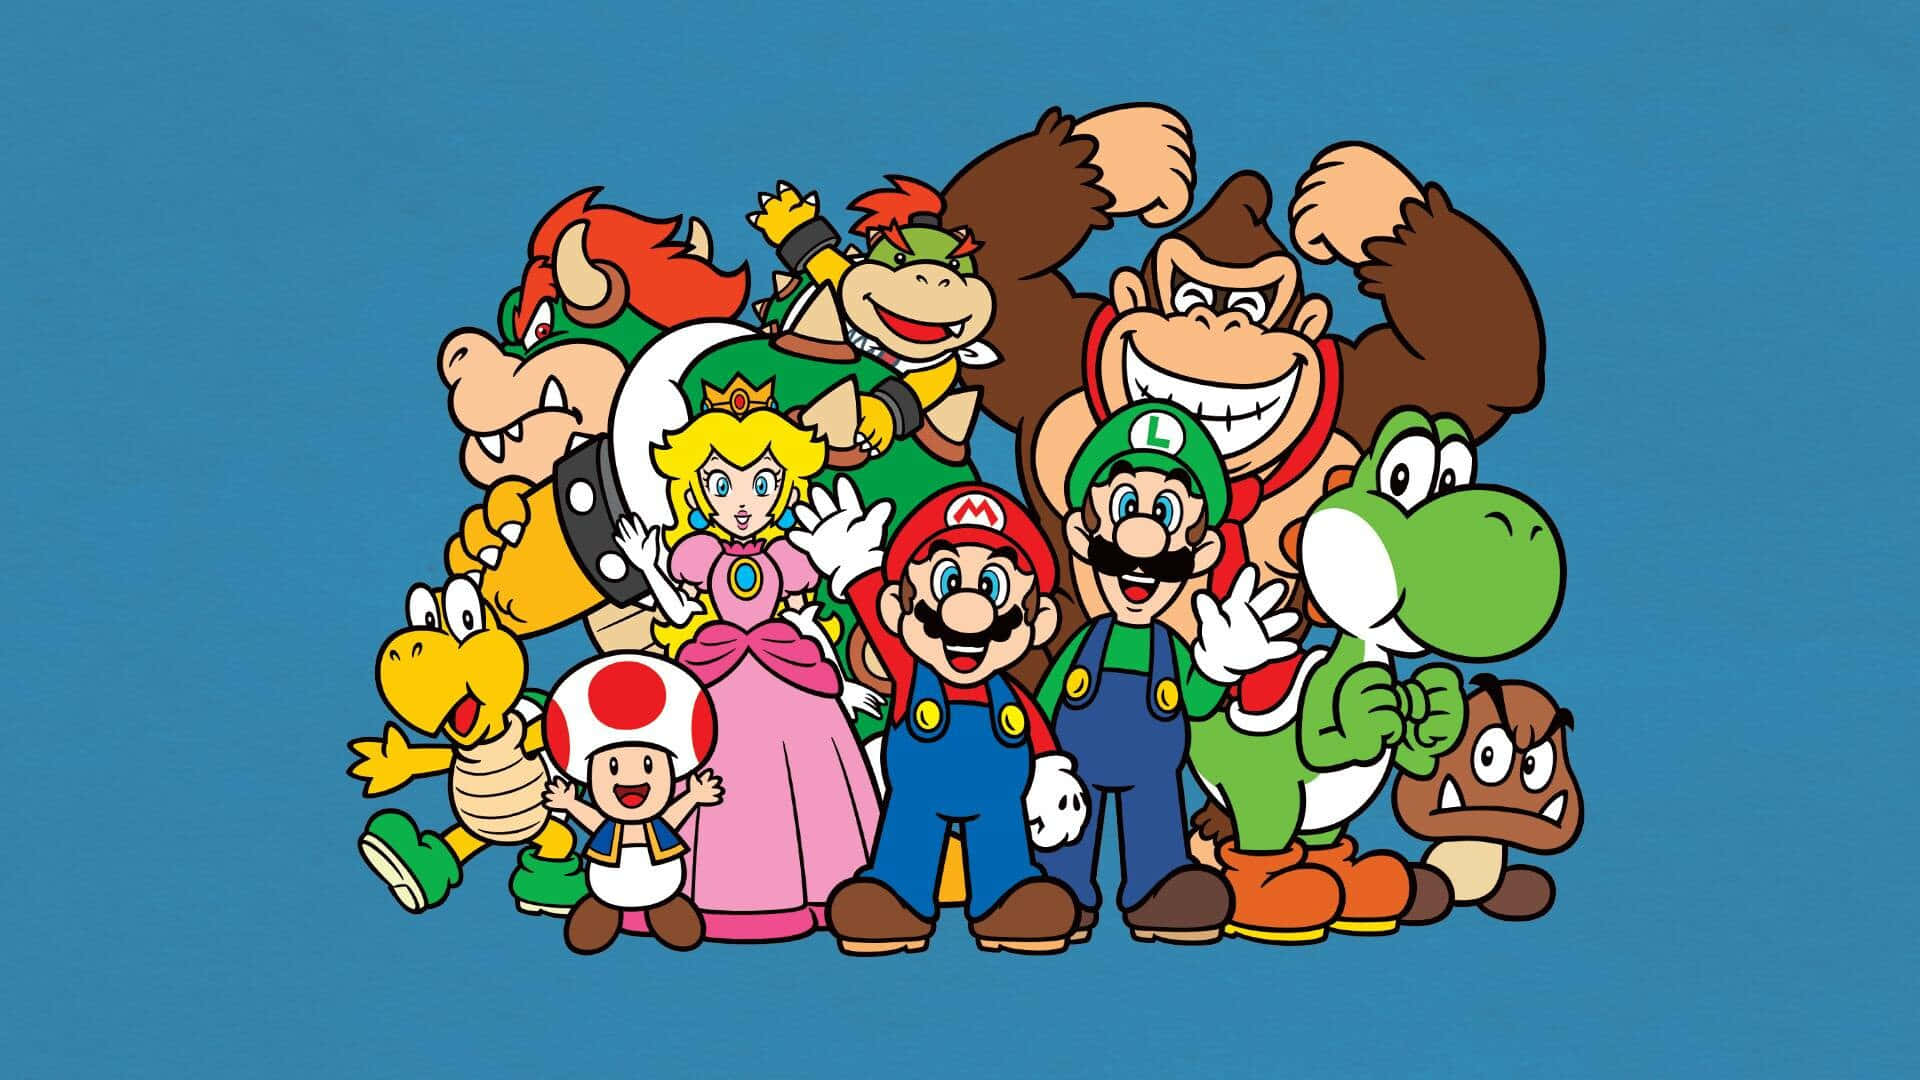 A Group Of Nintendo Characters Standing Together Wallpaper